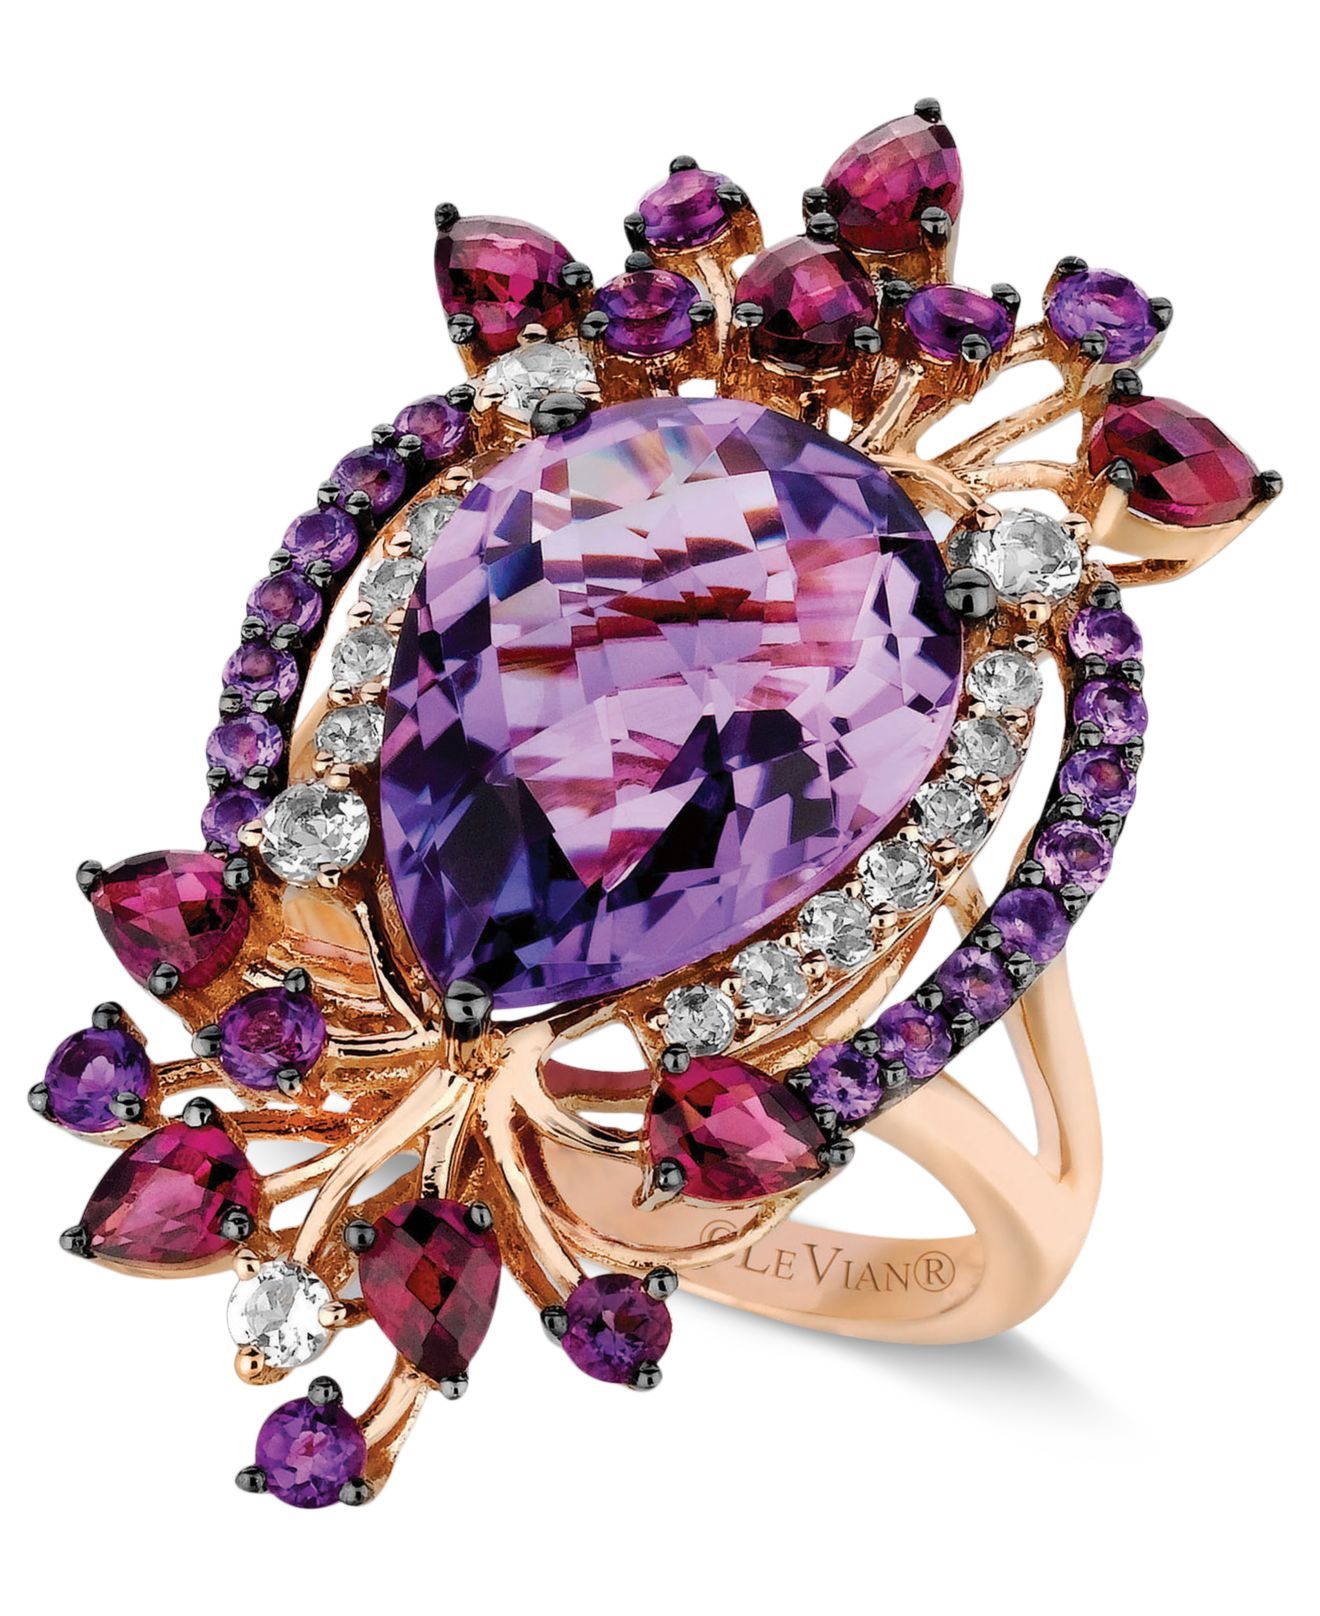 Lyst Le Vian Crazy Collection Multistone Ring In 14k Strawberry Rose Gold (8 Ct. T.w.) in Pink